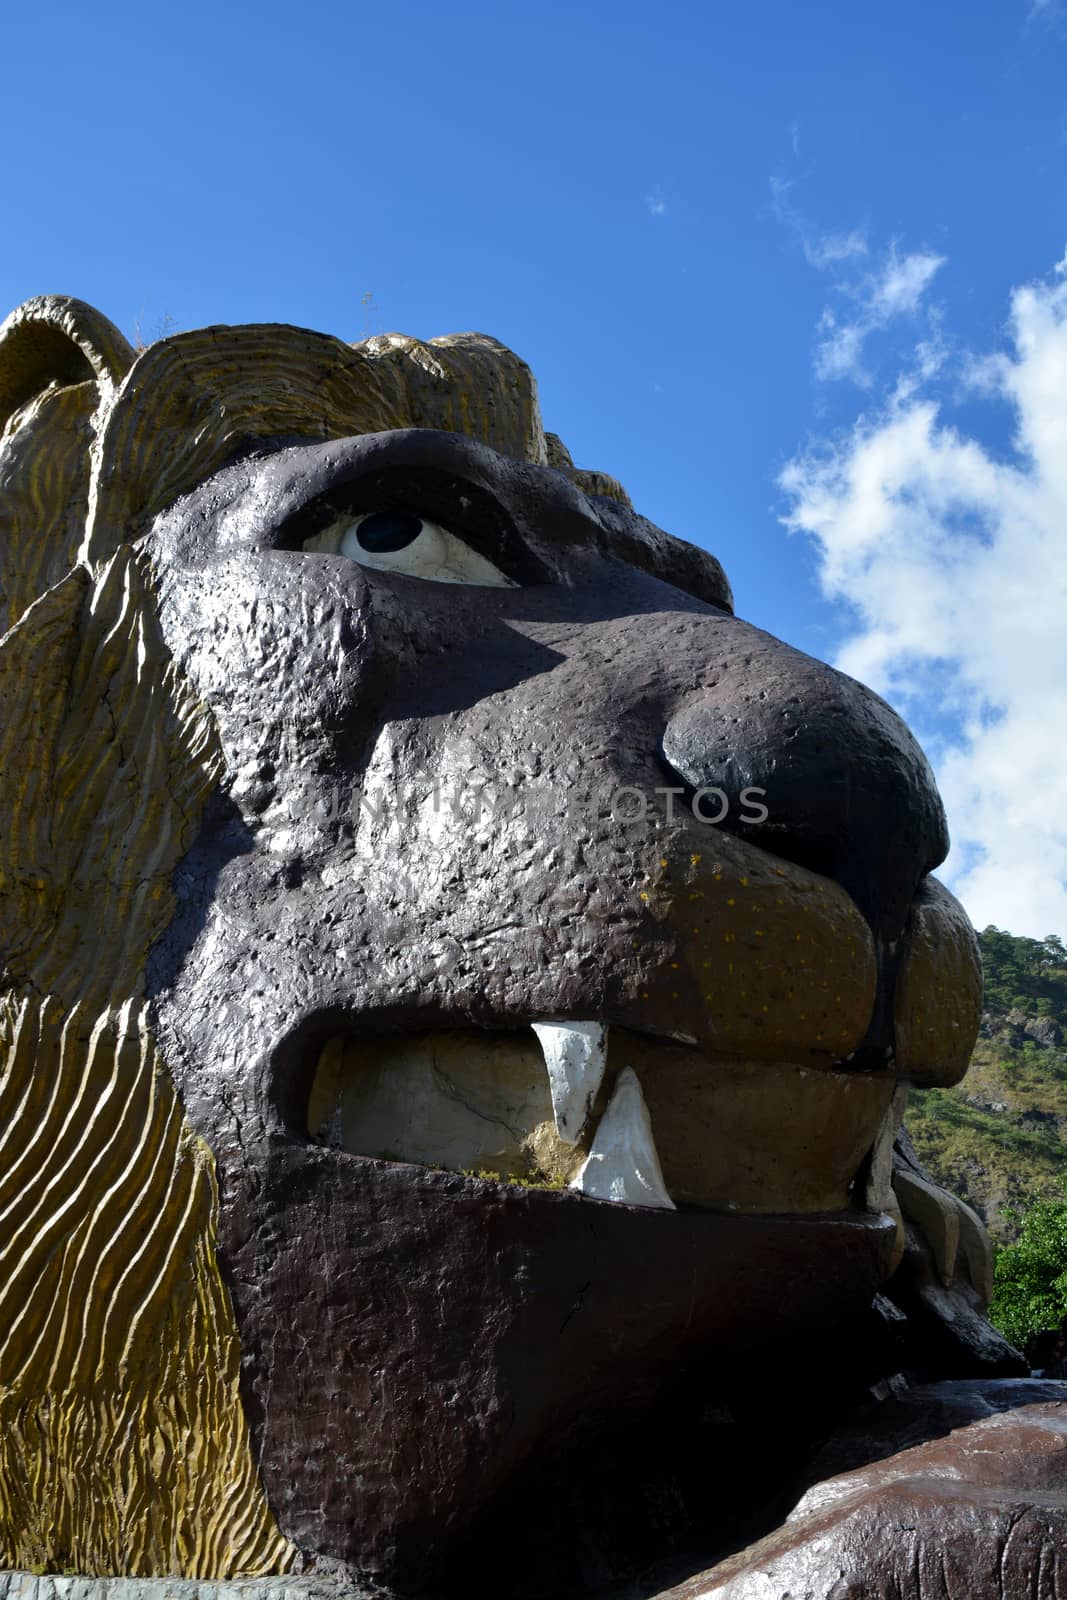 The Lion's Head is a famous attraction along Kennon Road, a major highway in Luzon, Philippines that leads to the city of Baguio